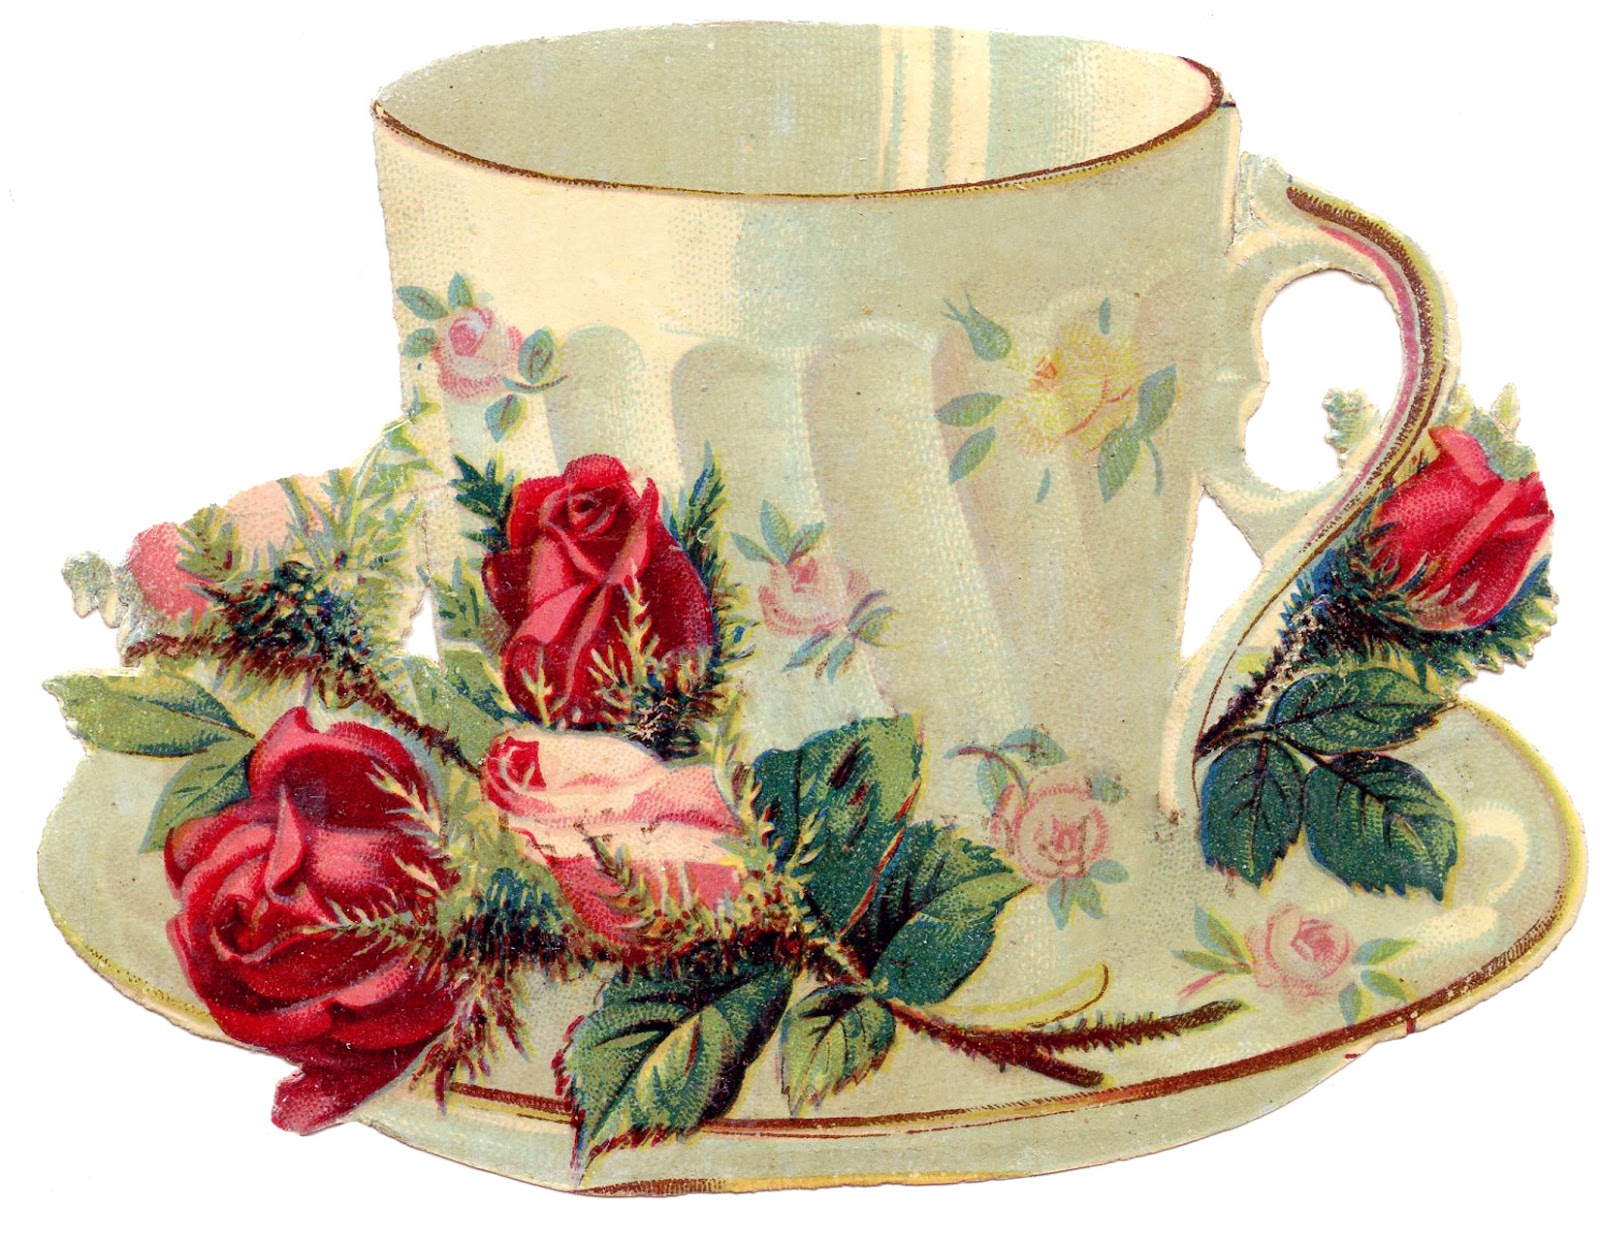 Free Vintage Images   Teacup With Roses   French   The Graphics Fairy